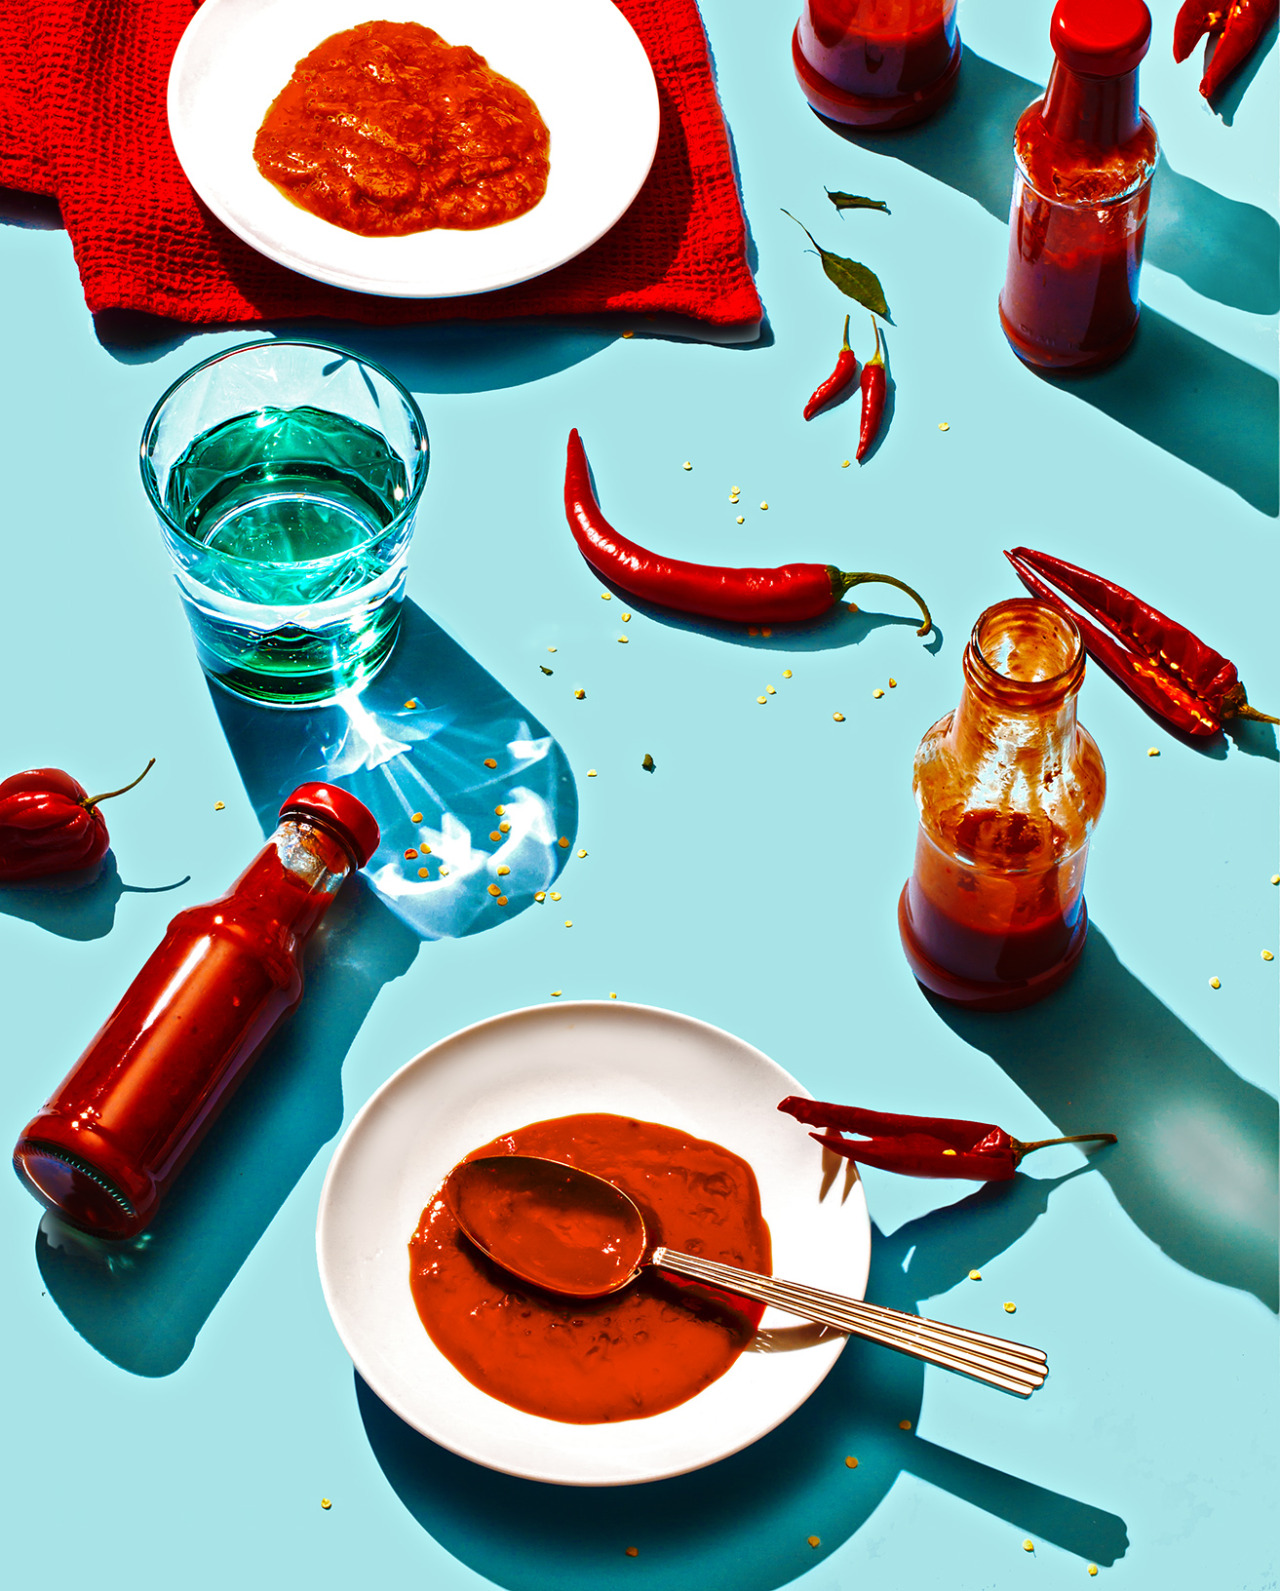   "HOT SAUCE, USA"&nbsp;&nbsp;FOR FAST COMPANY (October 2015)  